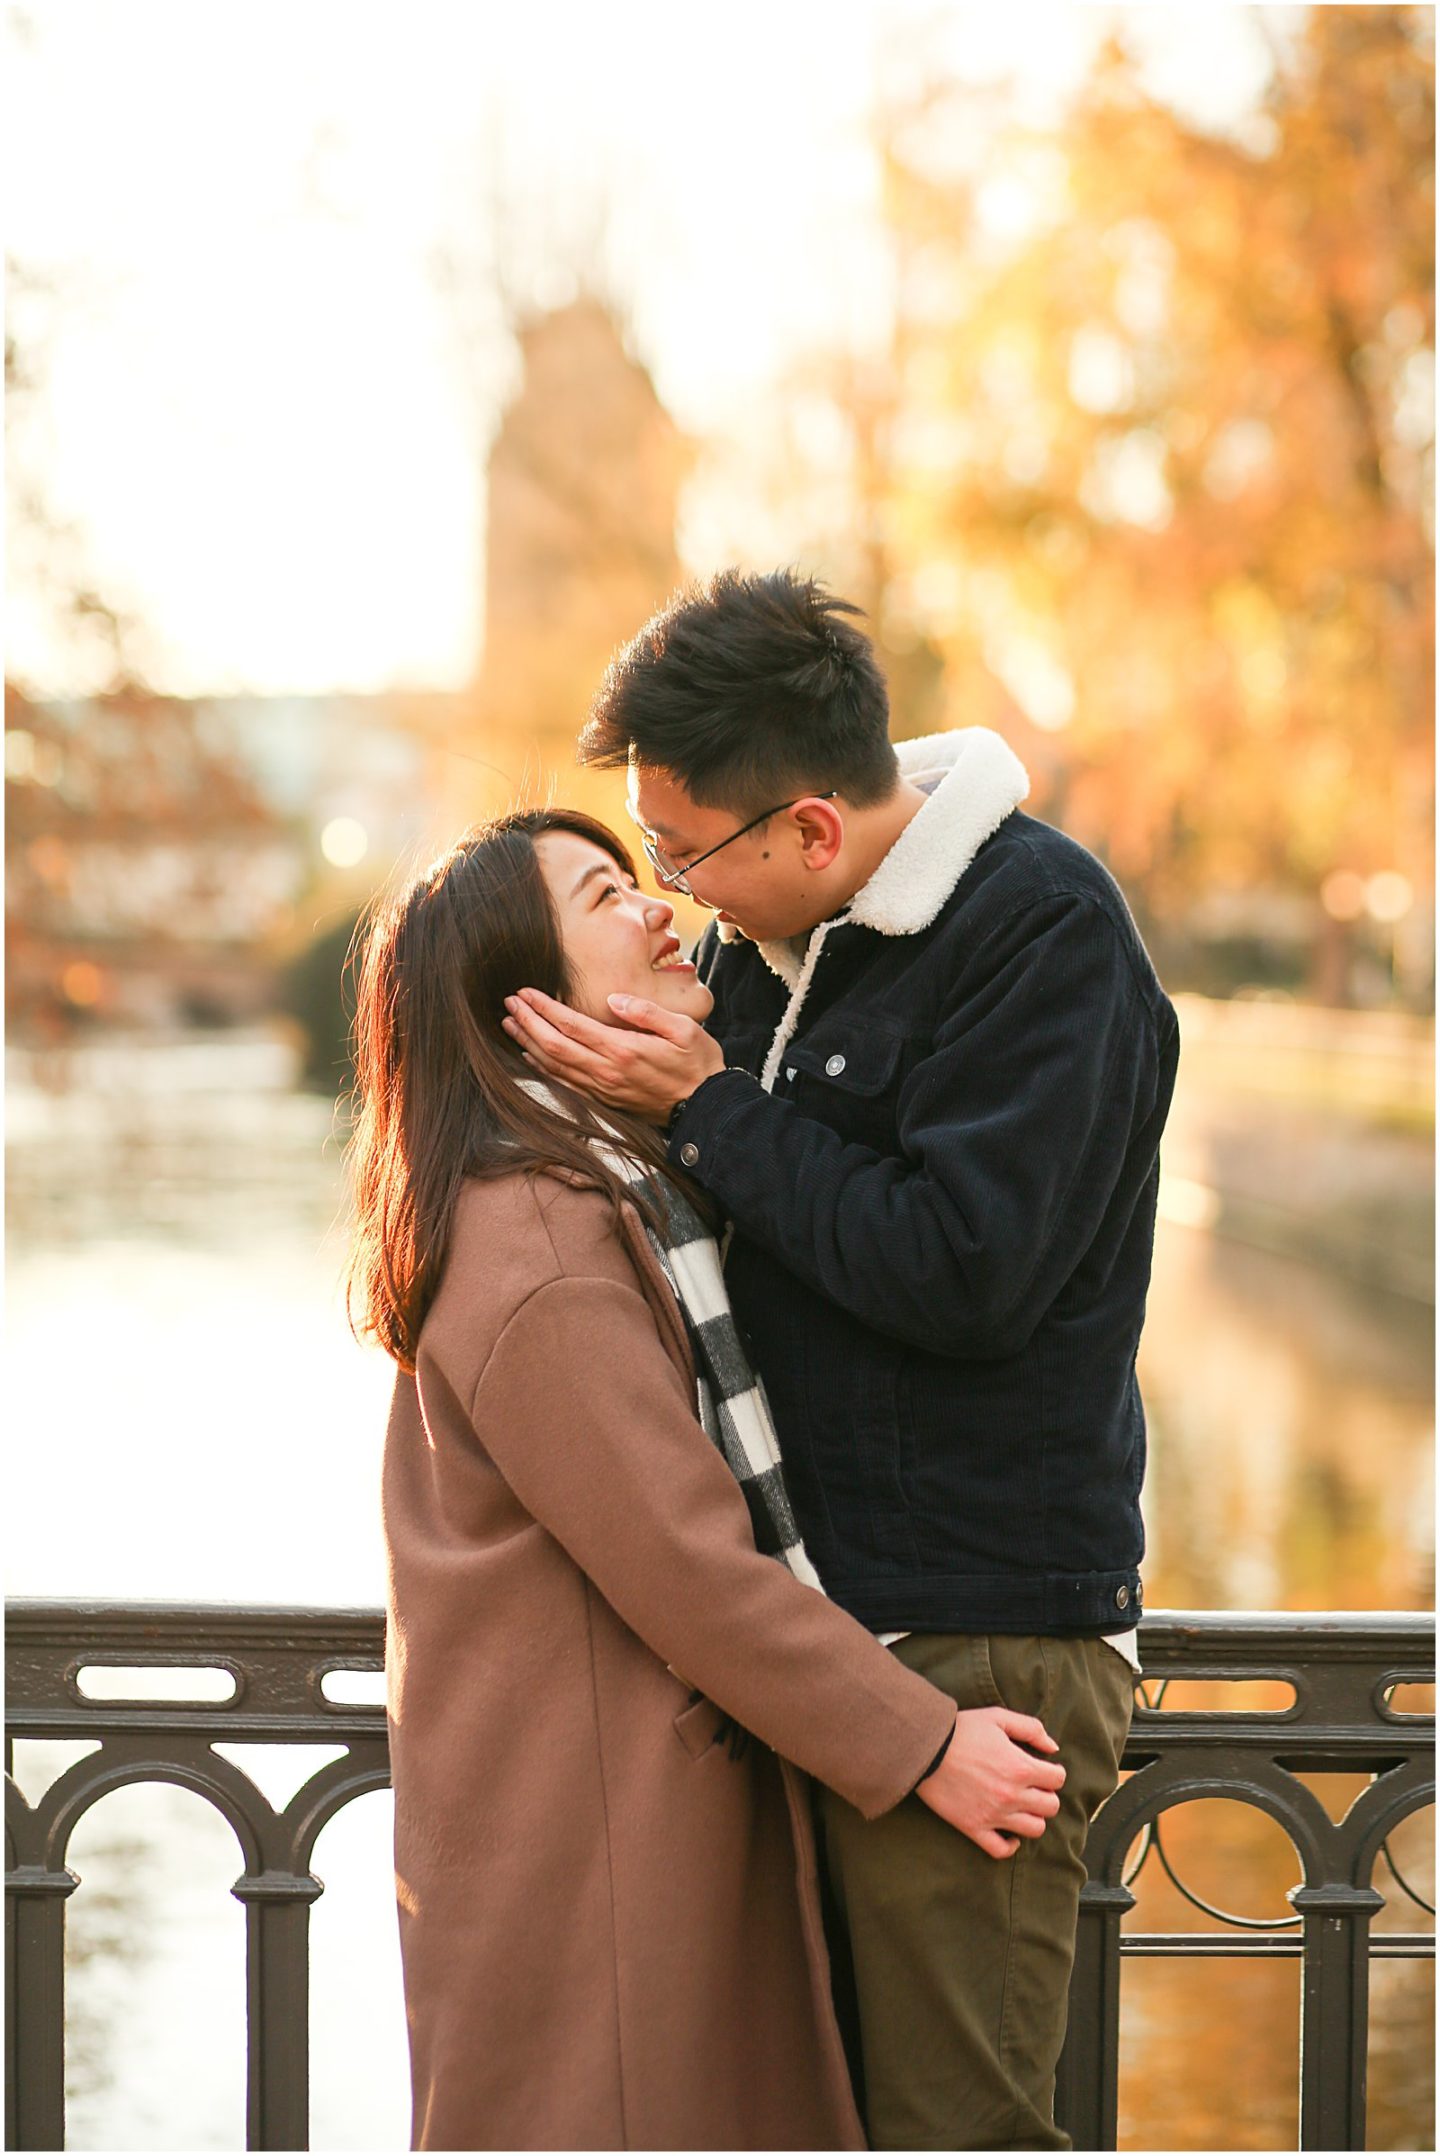 golden hour photoshoot in strasbourg france with engaged couple